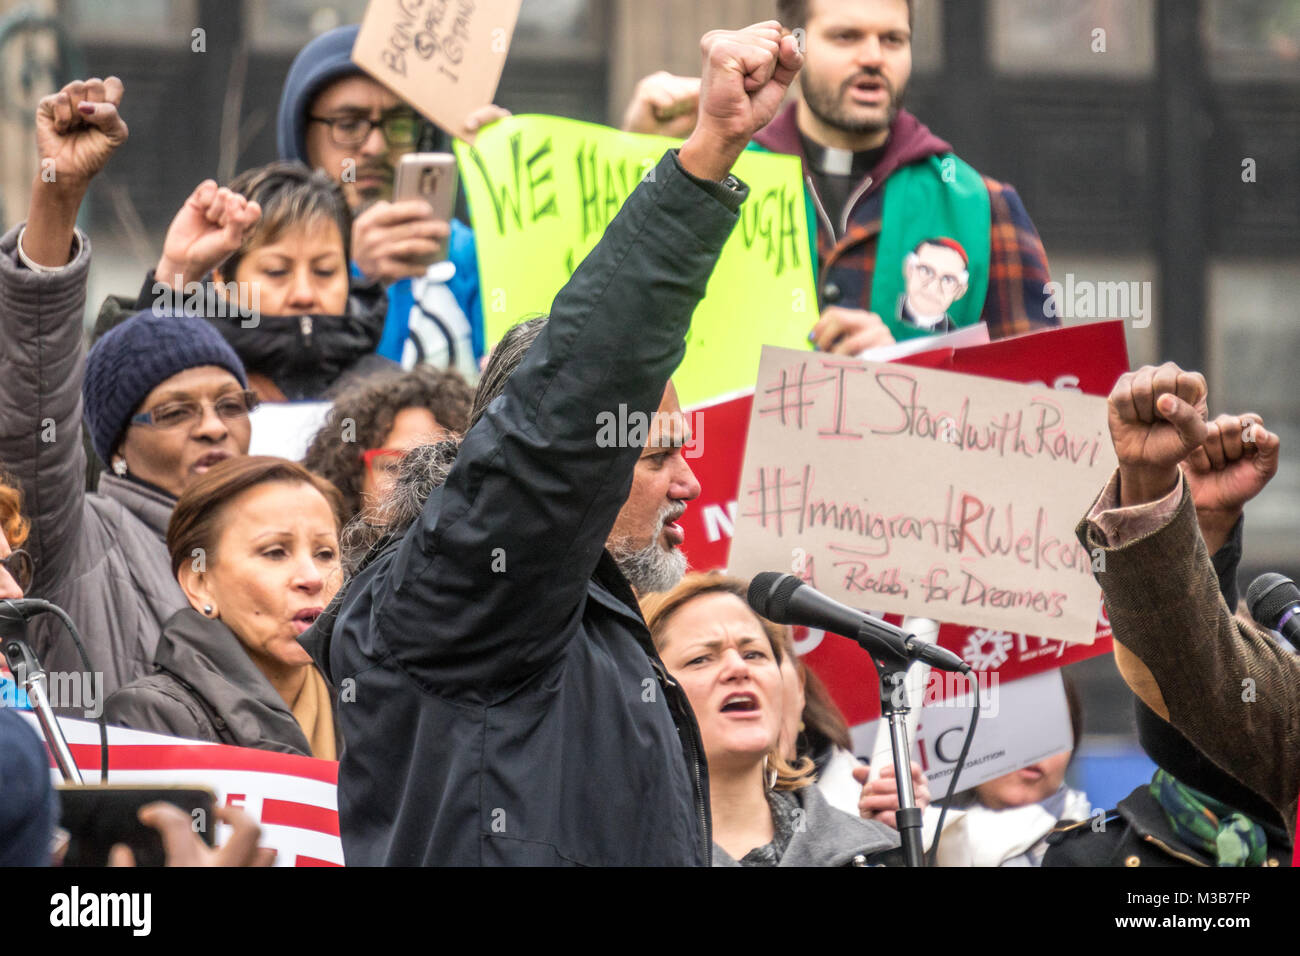 New York, USA,  10 Feb 2018.  Immigrant rights activist Ravi Ragbir addresses a 'You Can’t Deport a Movement' protest in New York city on February 10. Ragbir was granted temporary stay of deportation the day before his scheduled removal. Photo by Enrique Shore/Alamy Live News Stock Photo